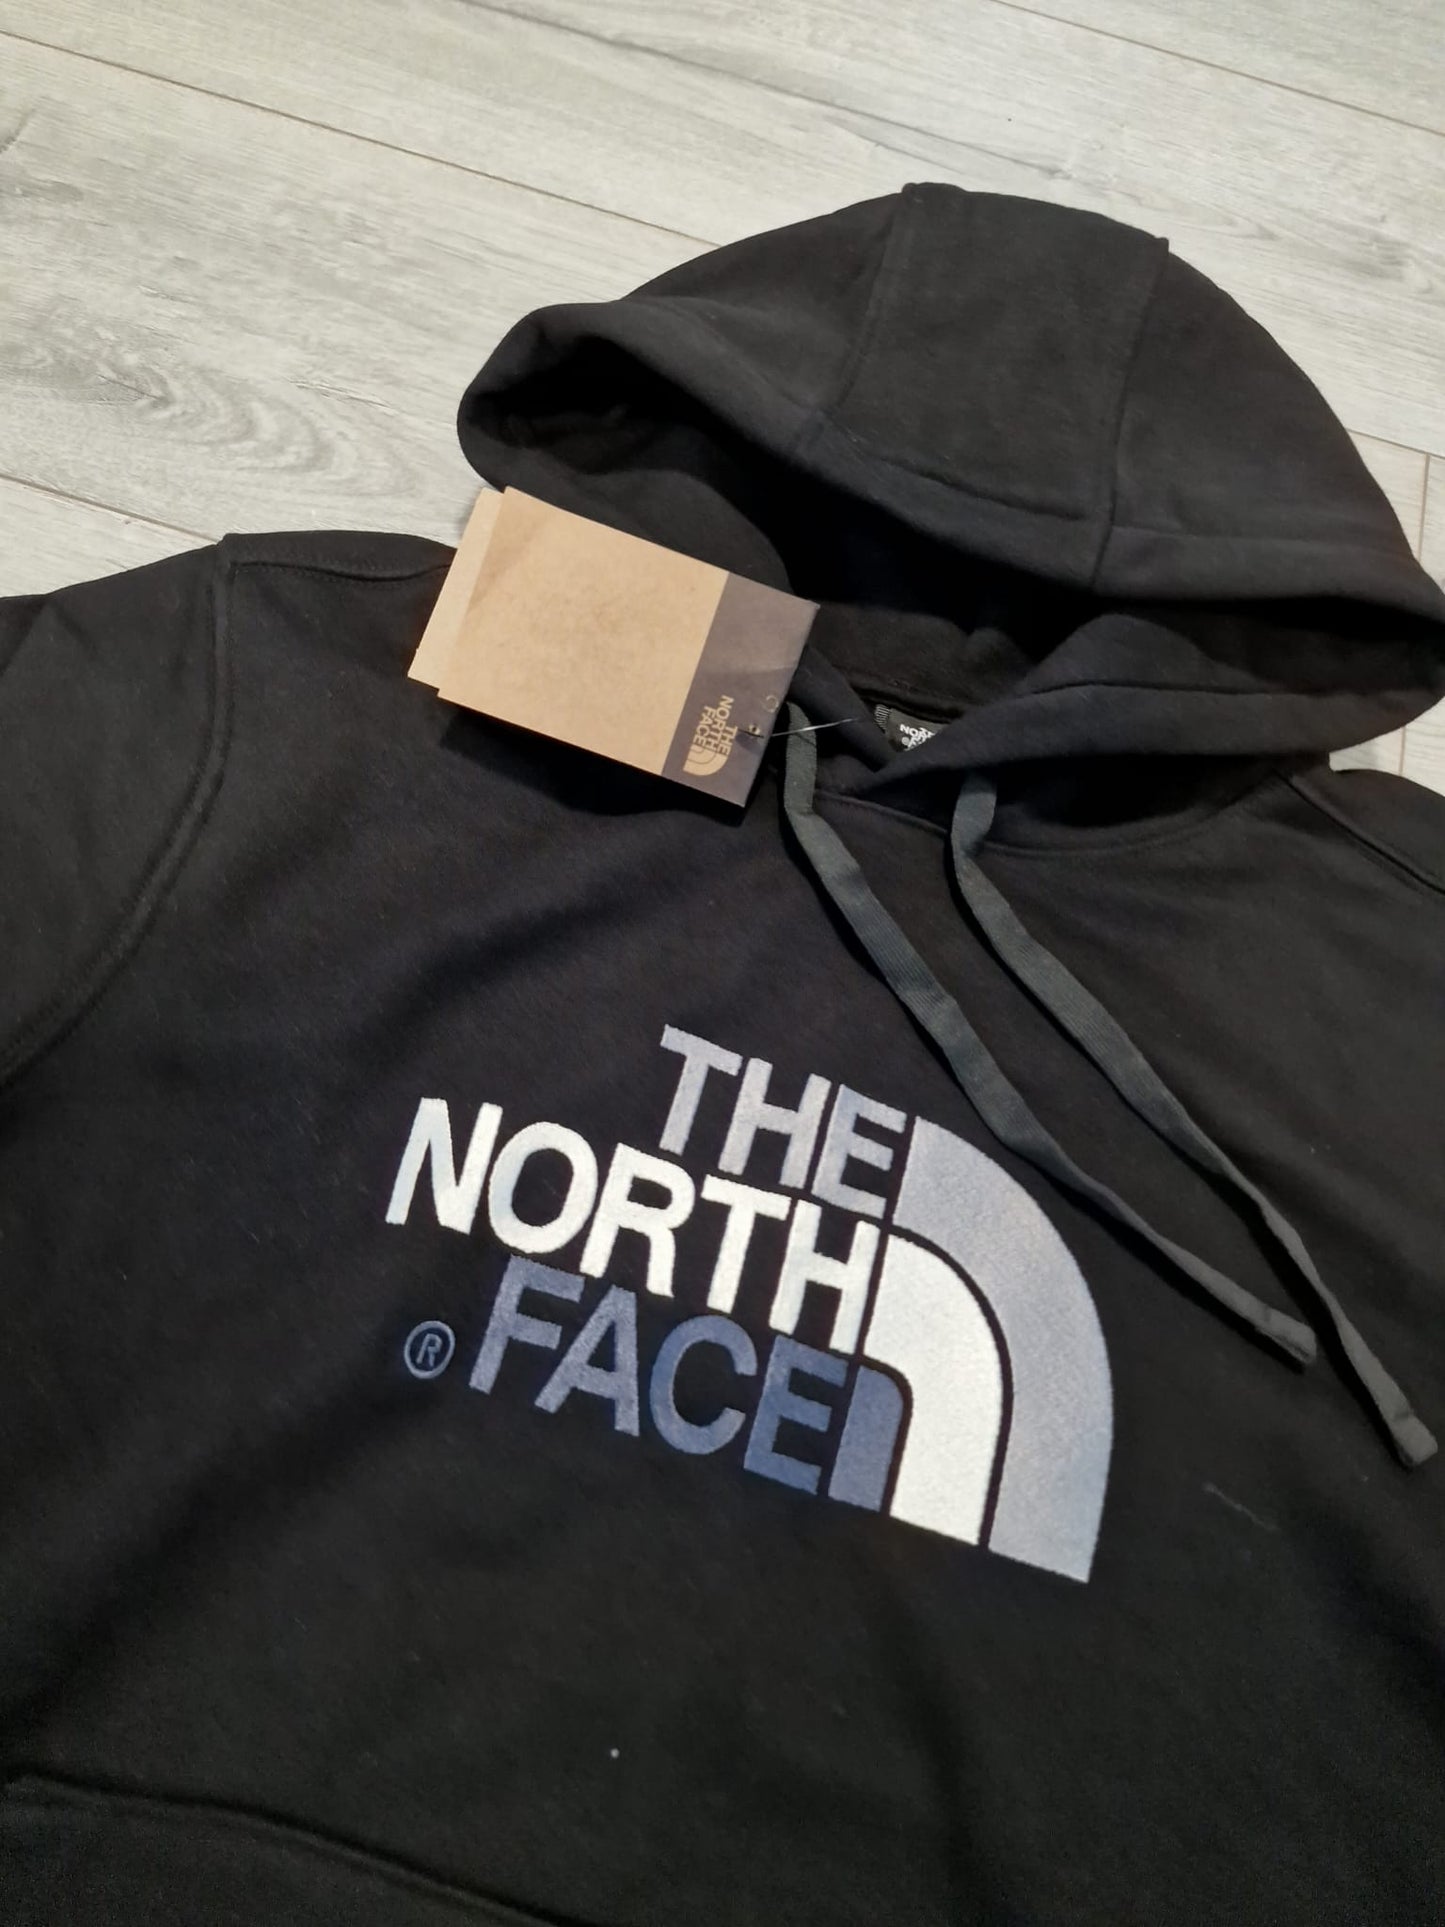 The North Face duks